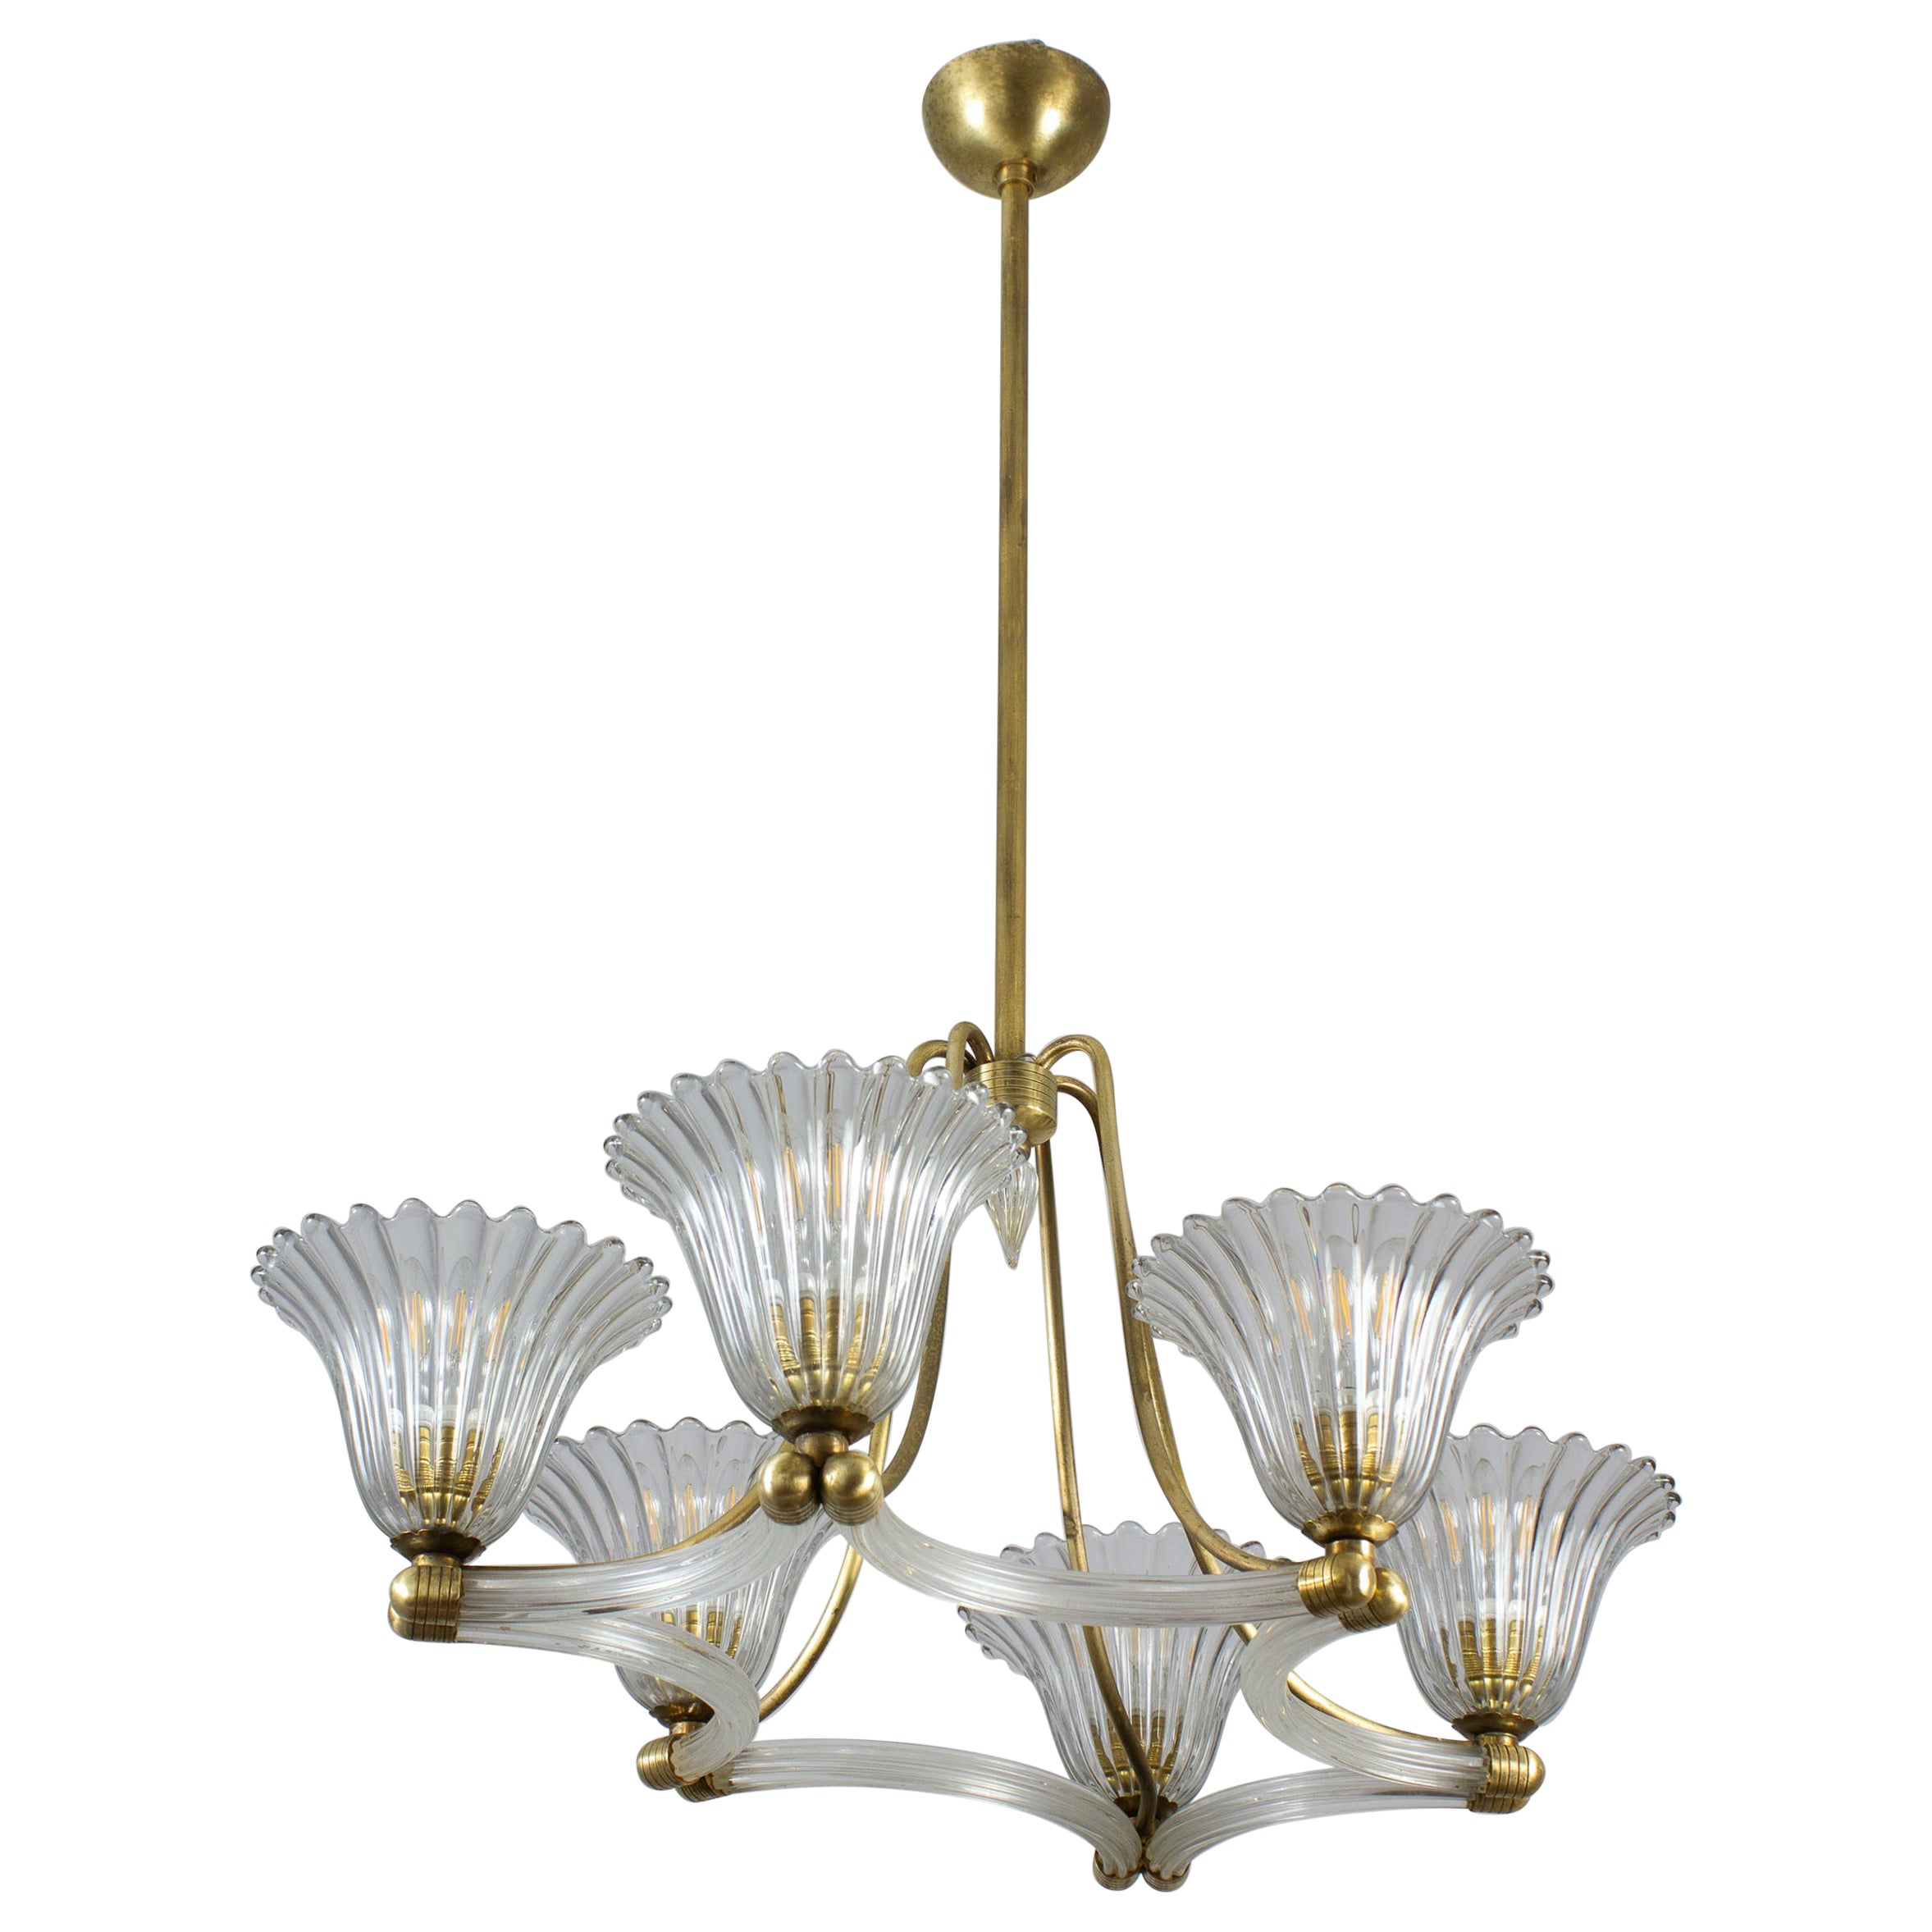  Art Deco Brass Mounted Murano Glass Chandelier by Ercole Barovier 1940 For Sale